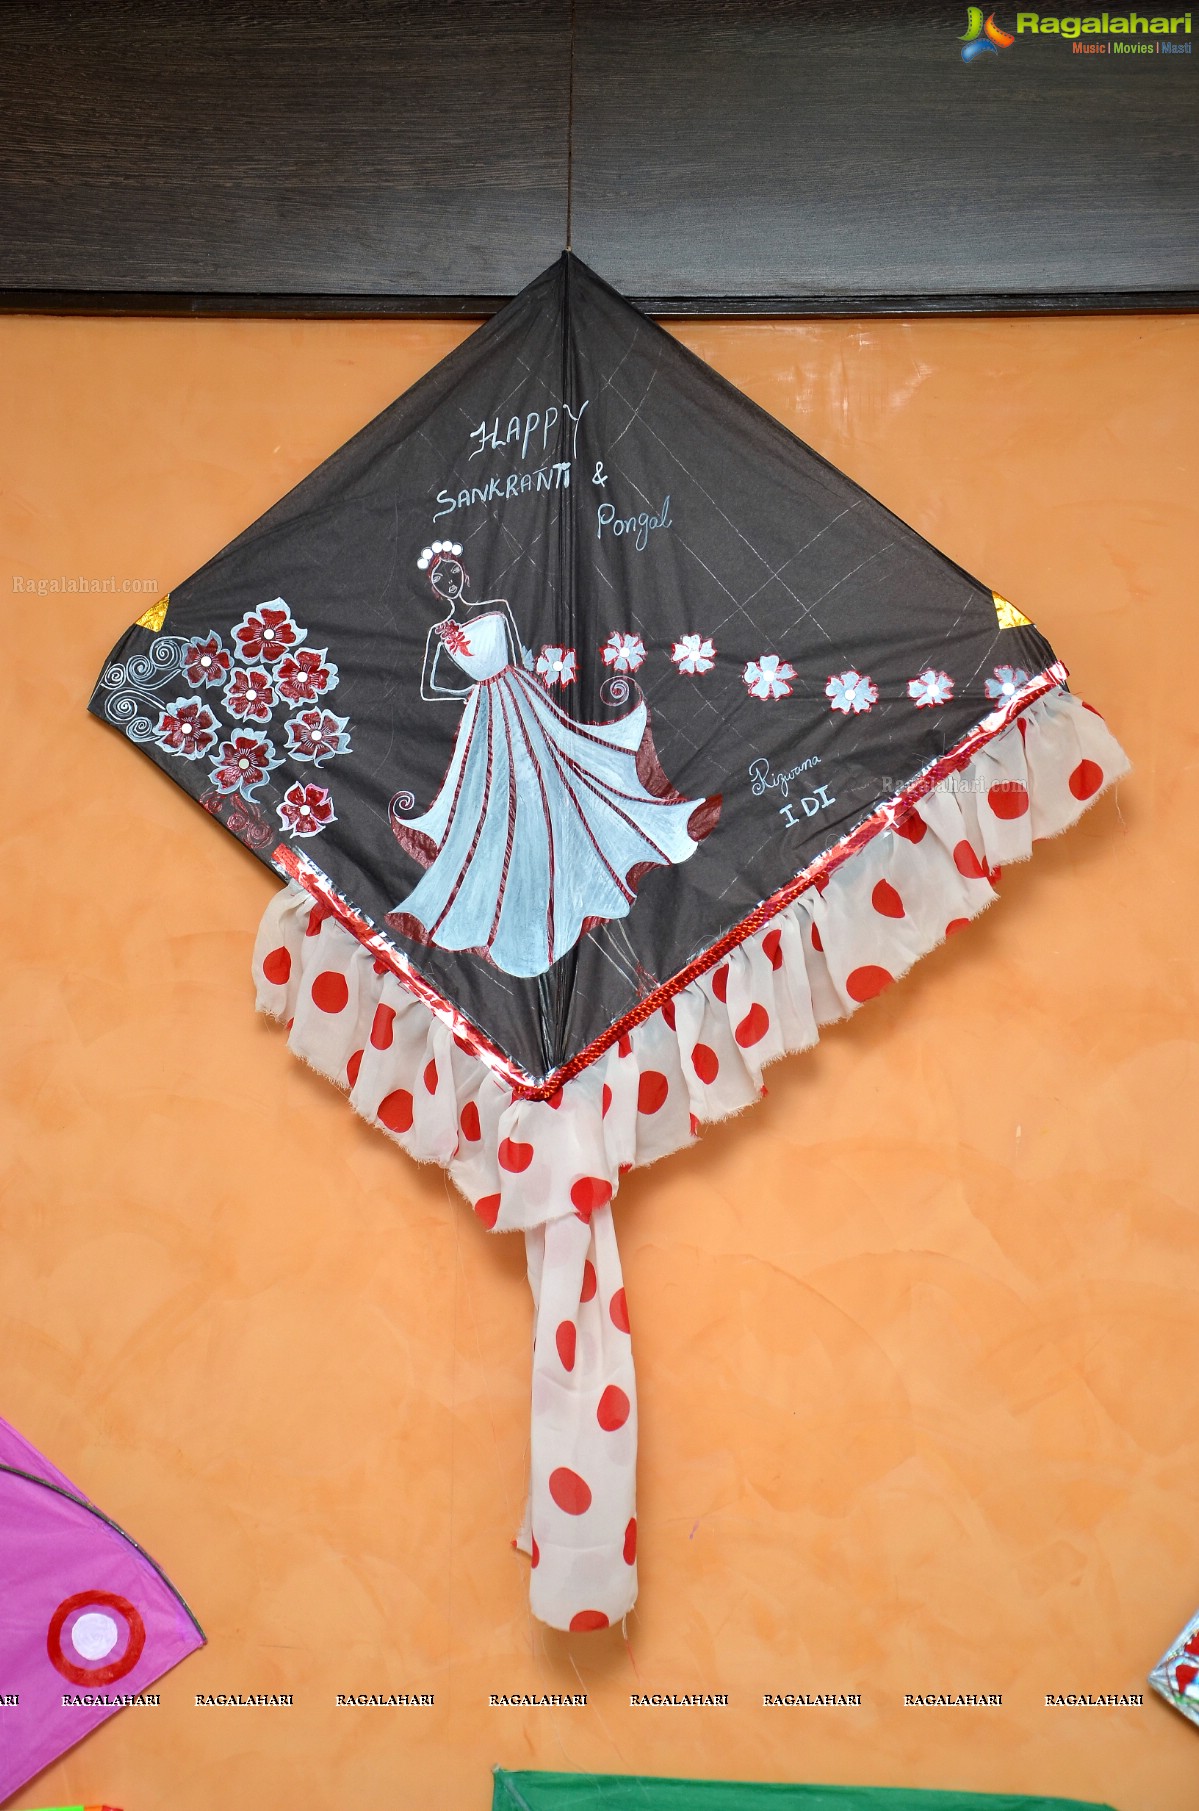 Flying Fashion on Designer Kites - Event by Instituto Design Innovation - Institute for Fashion and Interior Design